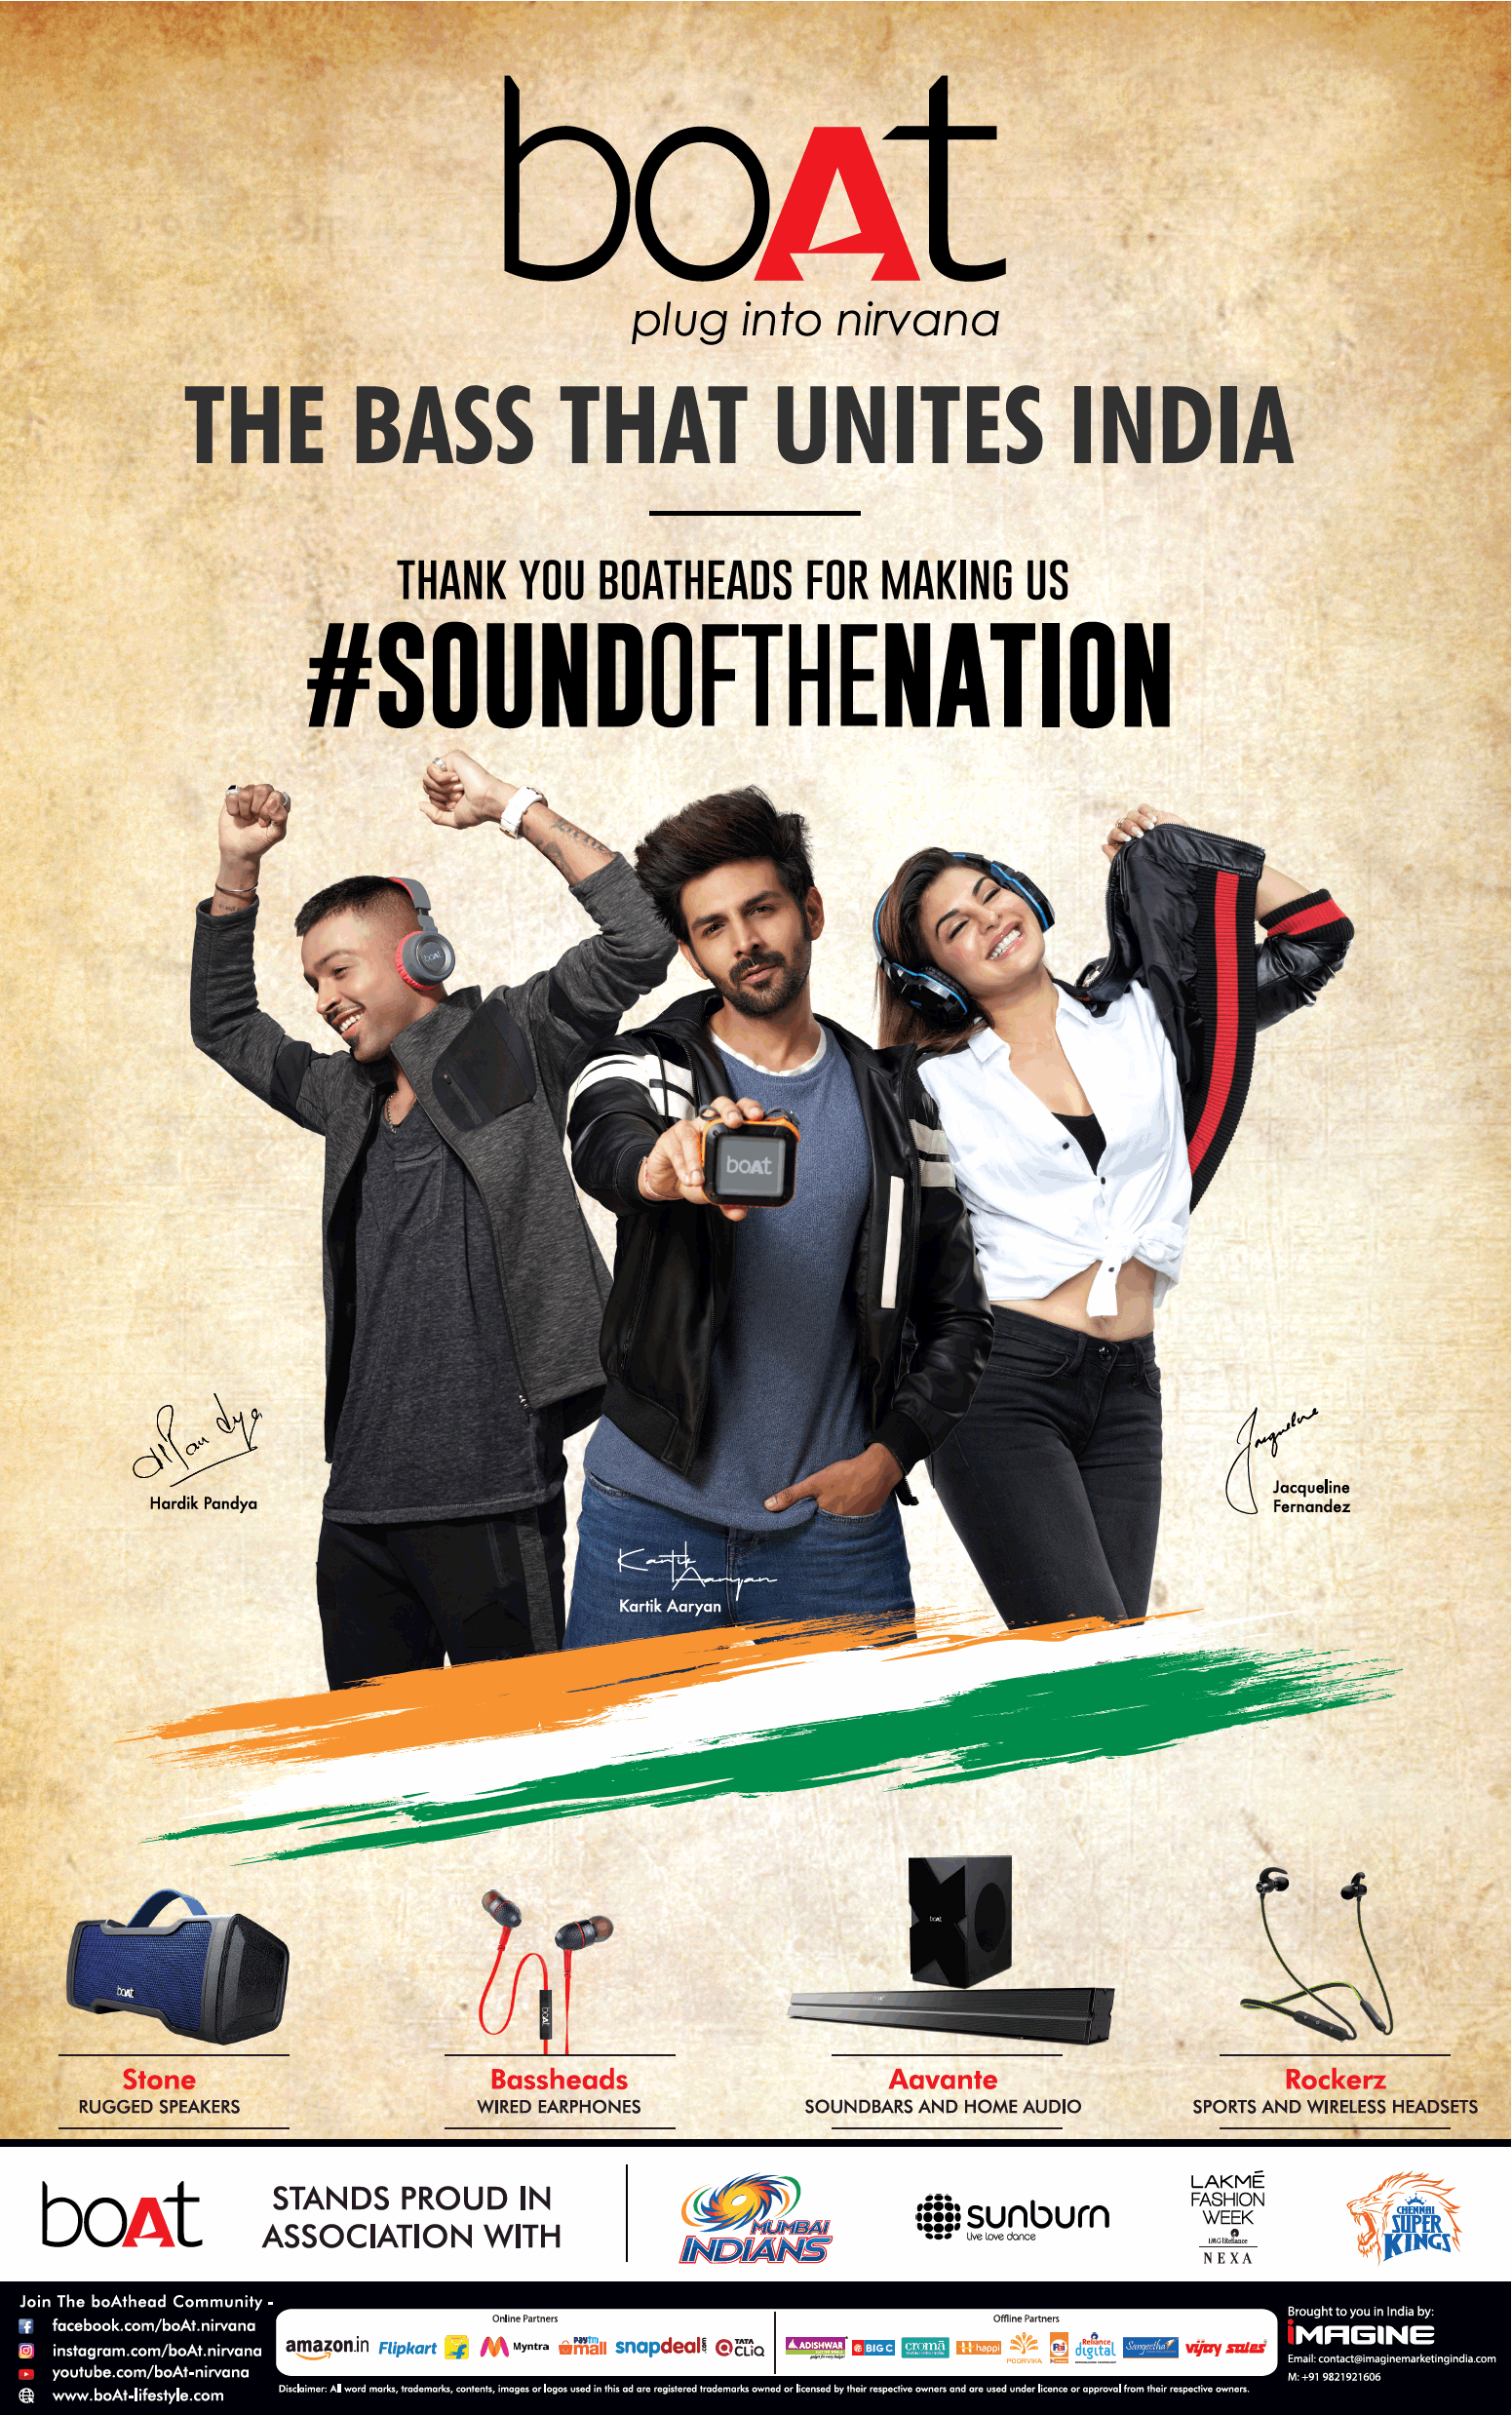 boat-headphones-plug-into-nirvana-sound-of-the-nation-ad-times-of-india-delhi-15-08-2019.png